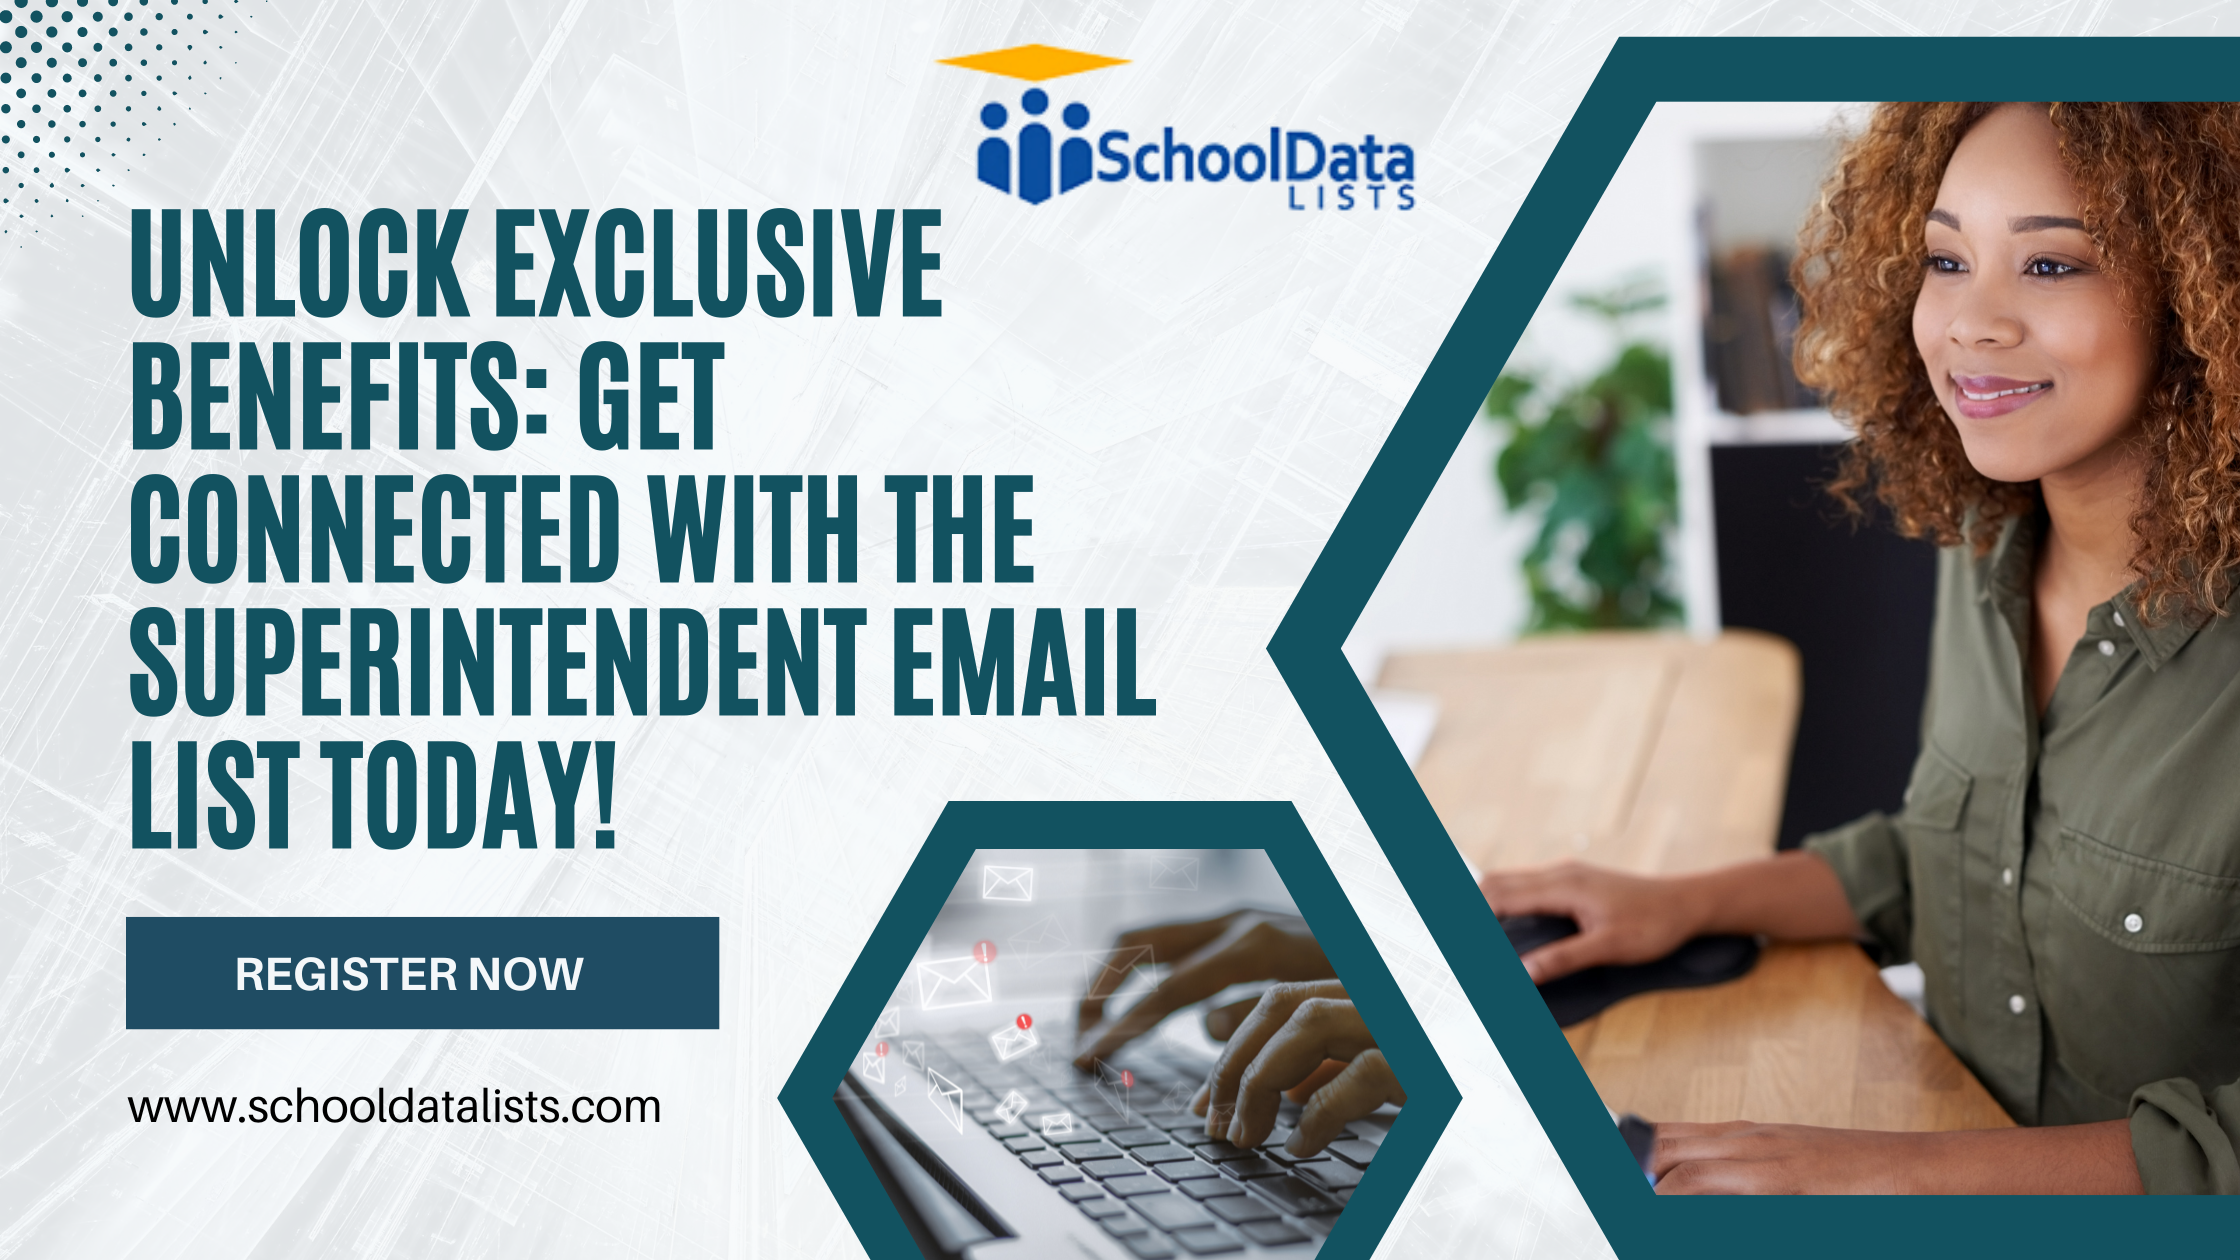 Unlock Exclusive Benefits: Get Connected with the Superintendent Email List Today!